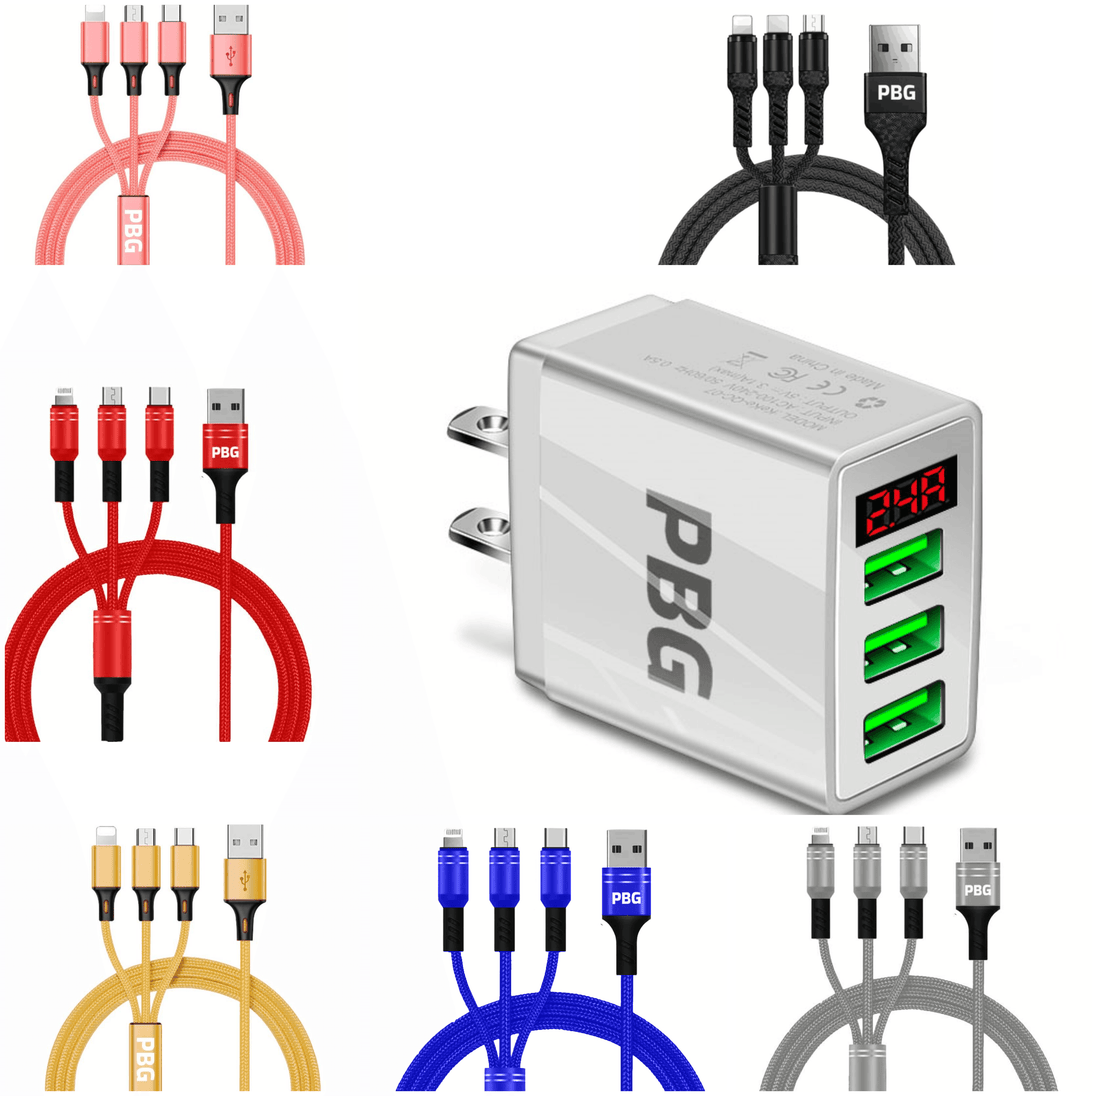 PBG 3 port LED Display Wall Charger and 3 in 1 Cable Bundle Black - PremiumBrandGoods